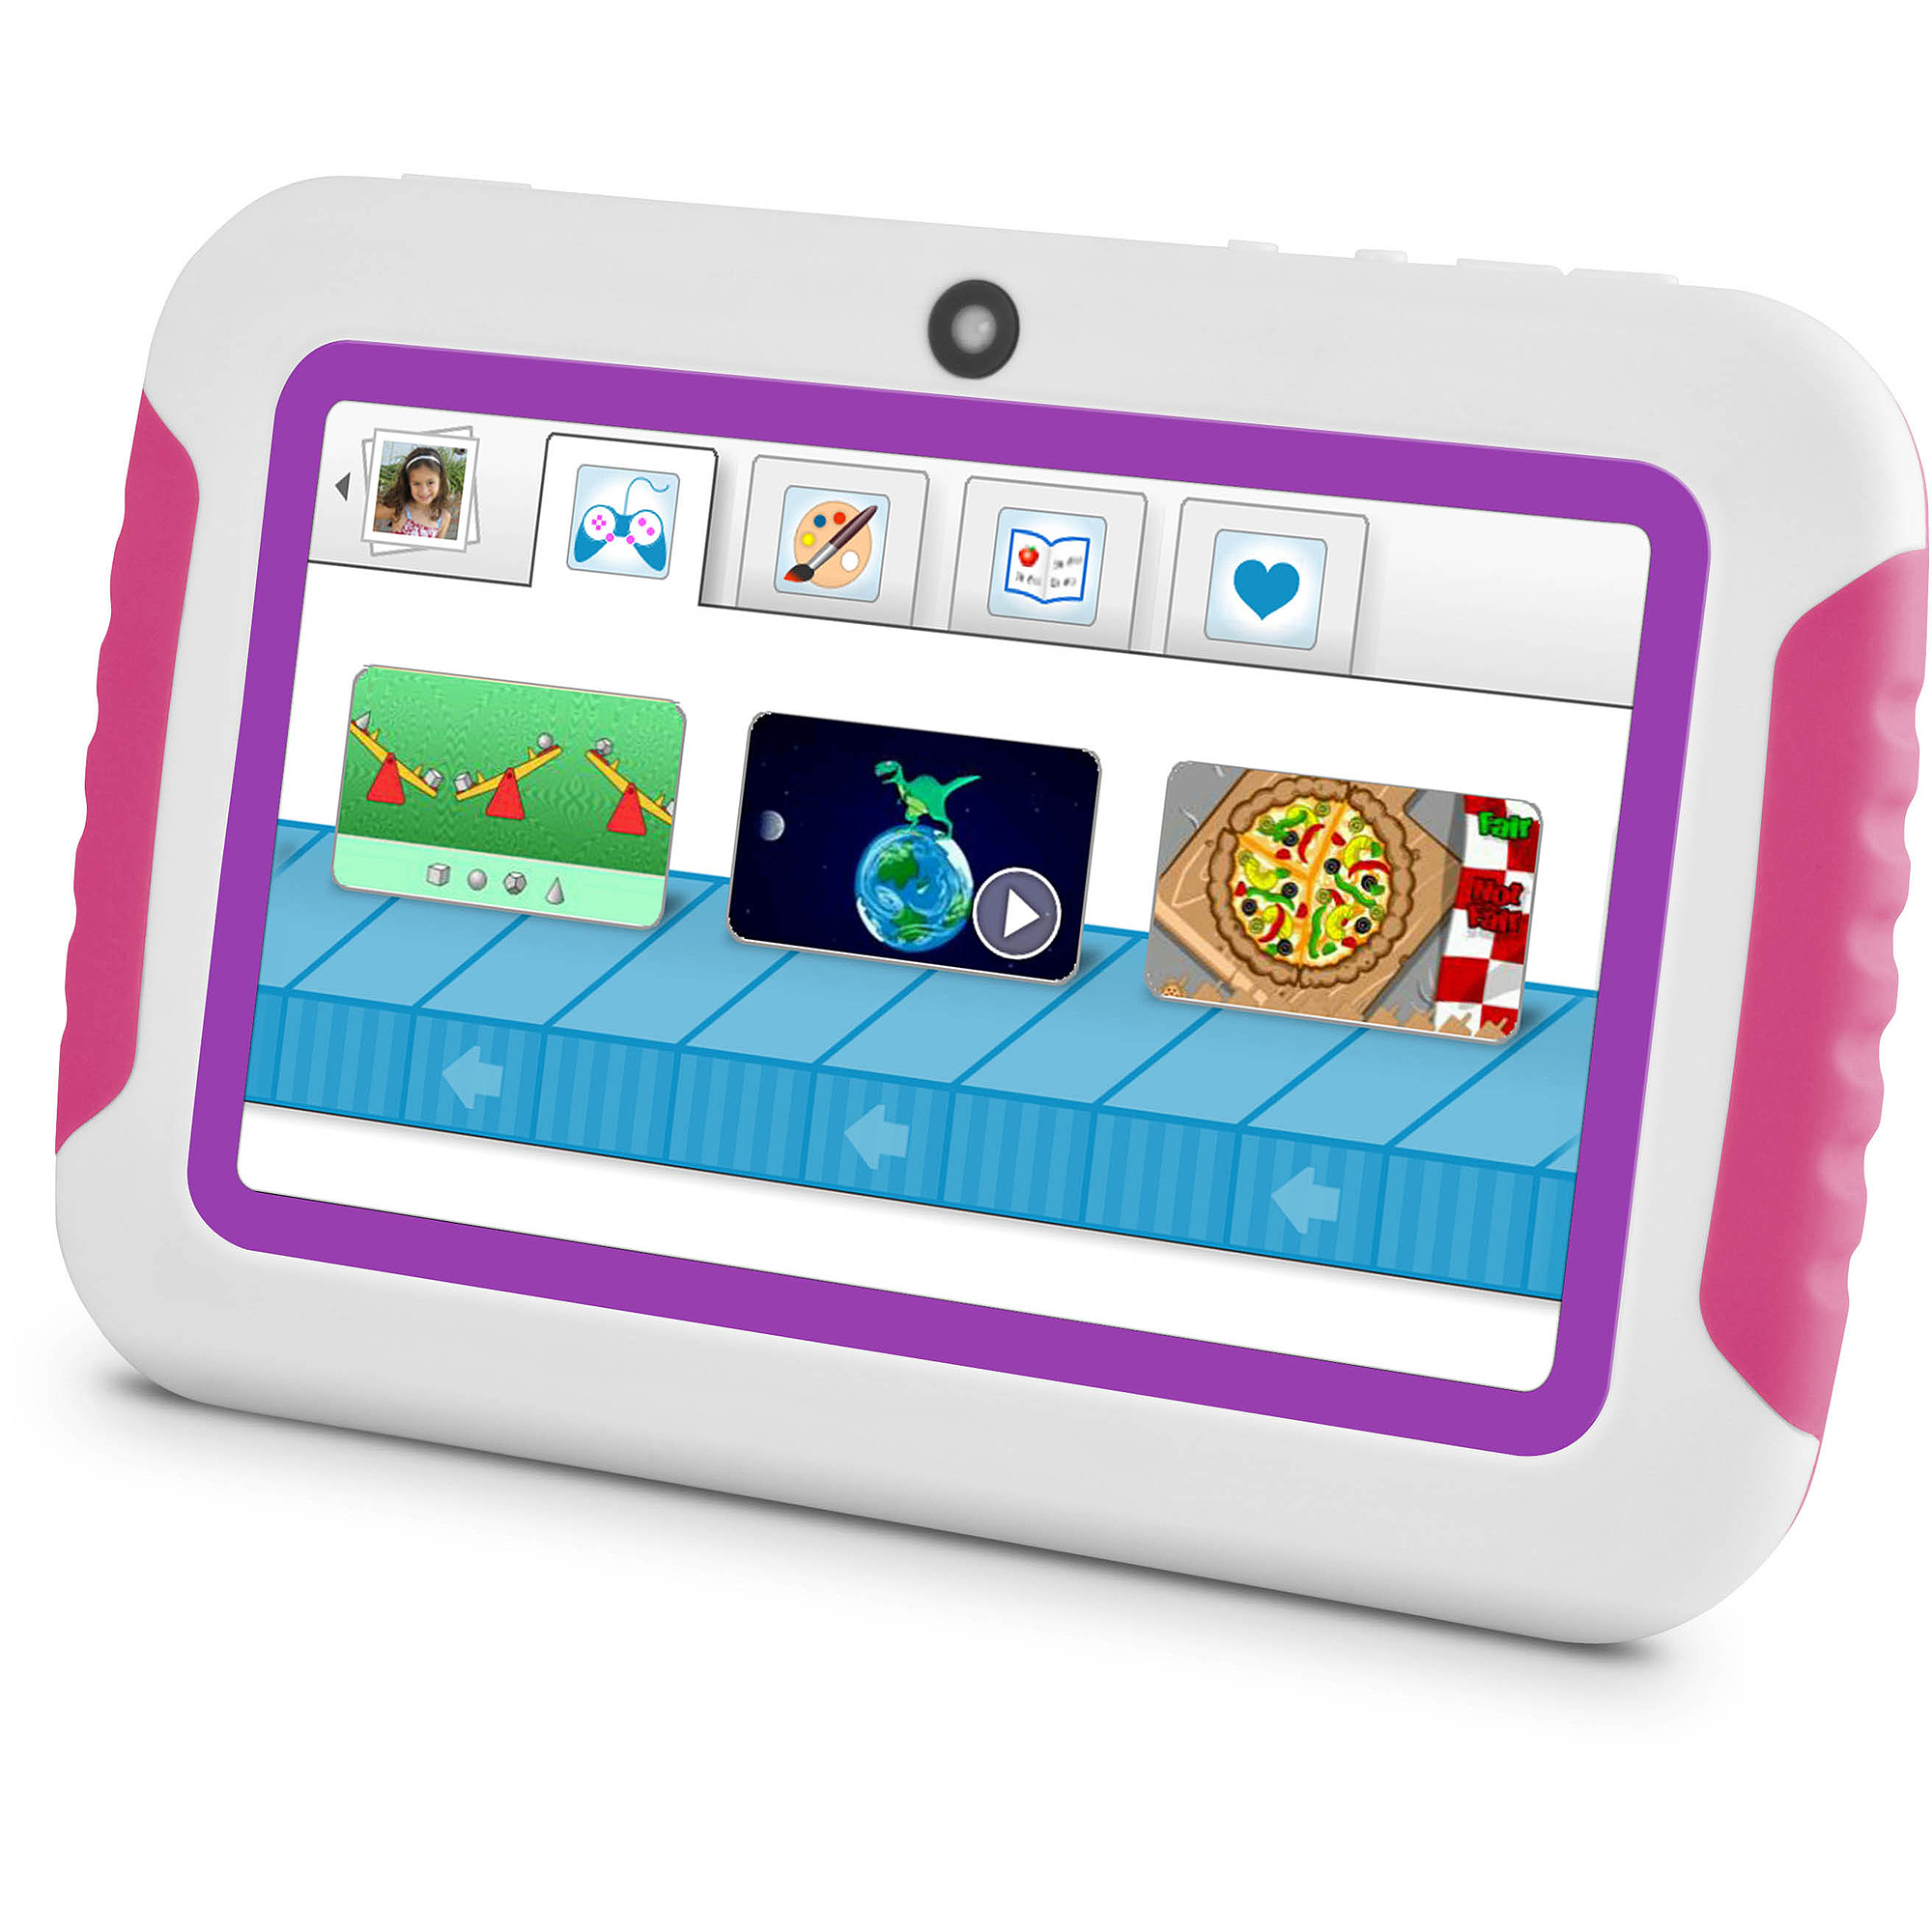 Ematic FunTab Mini with WiFi 4.3" Touchscreen Tablet PC Featuring Android 4.0 (Ice Cream Sandwich) Operating System - image 1 of 7